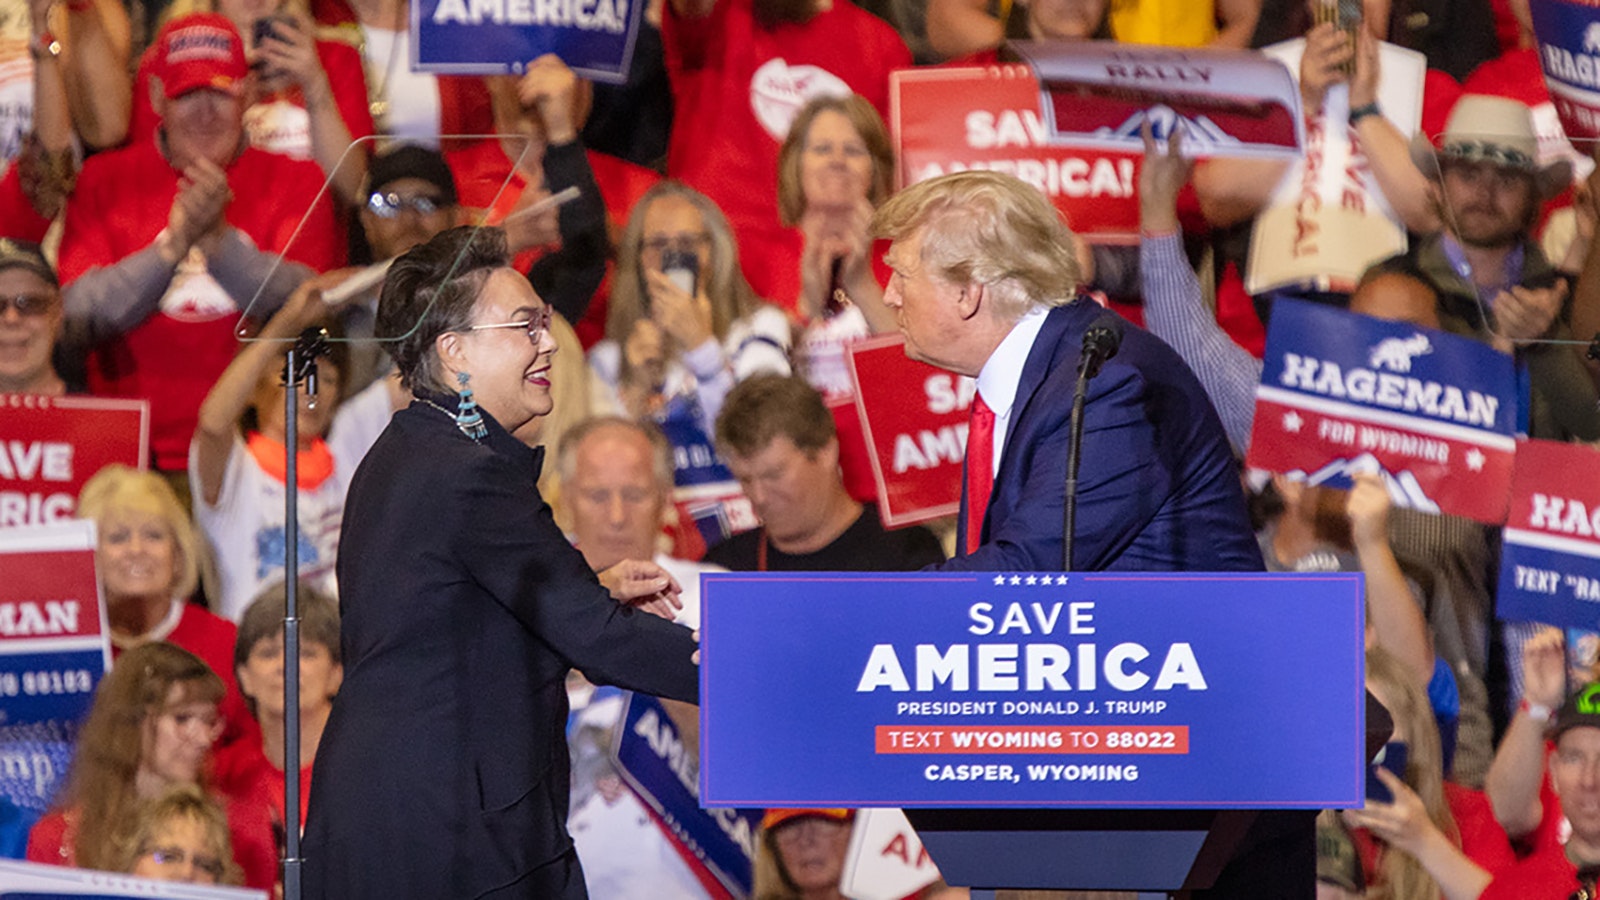 Harriet Hageman and Donald Trump together at a Save America rally in Casper, Wyoming, in May 2022.